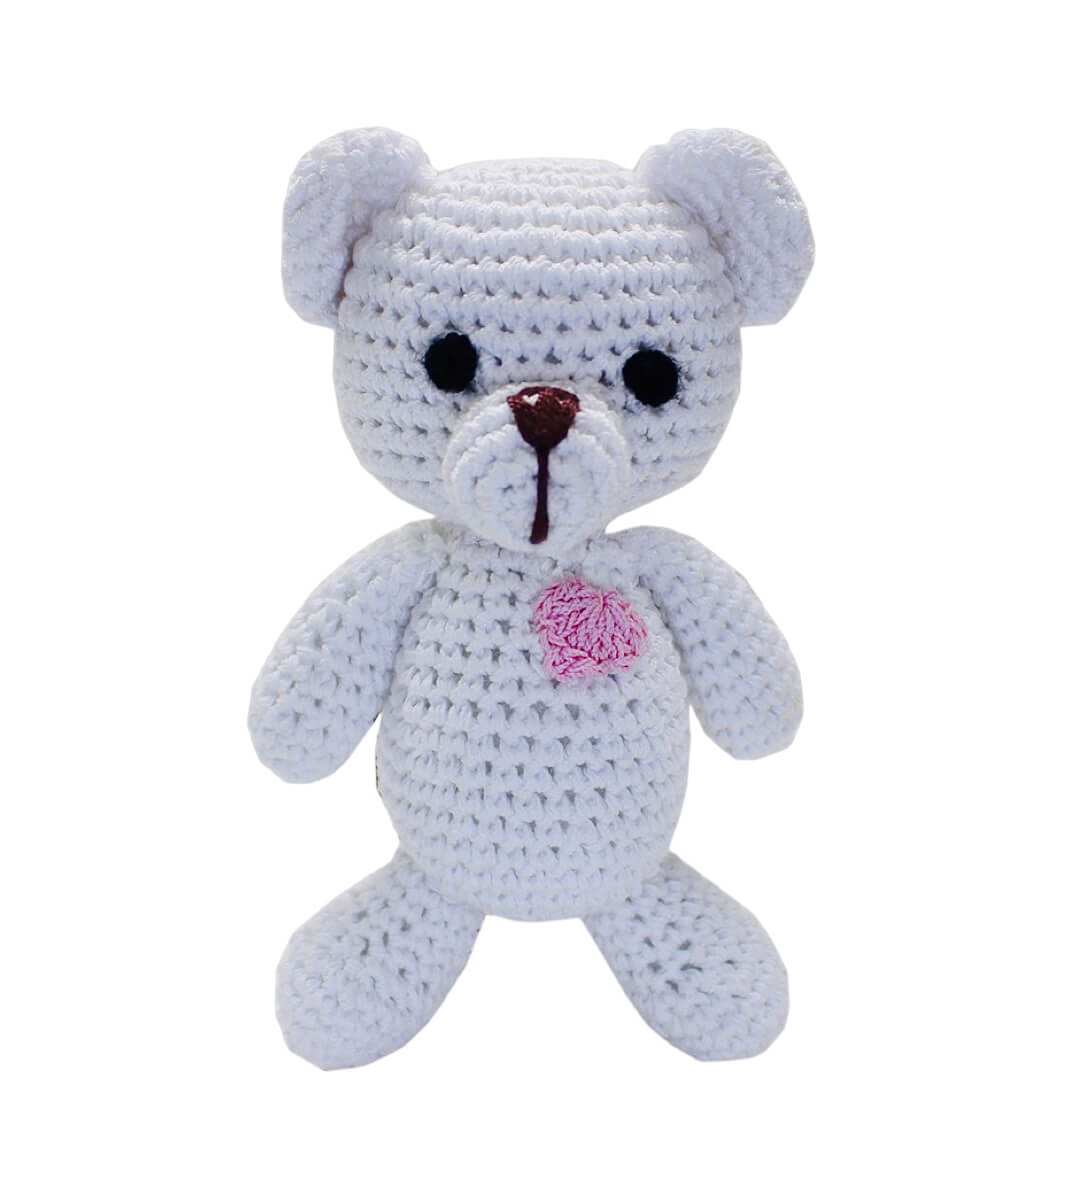 Knit Knacks "Teddy the White Bear" handmade organic cotton dog toy. White bear with a sweet face and a pink heart on its chest.